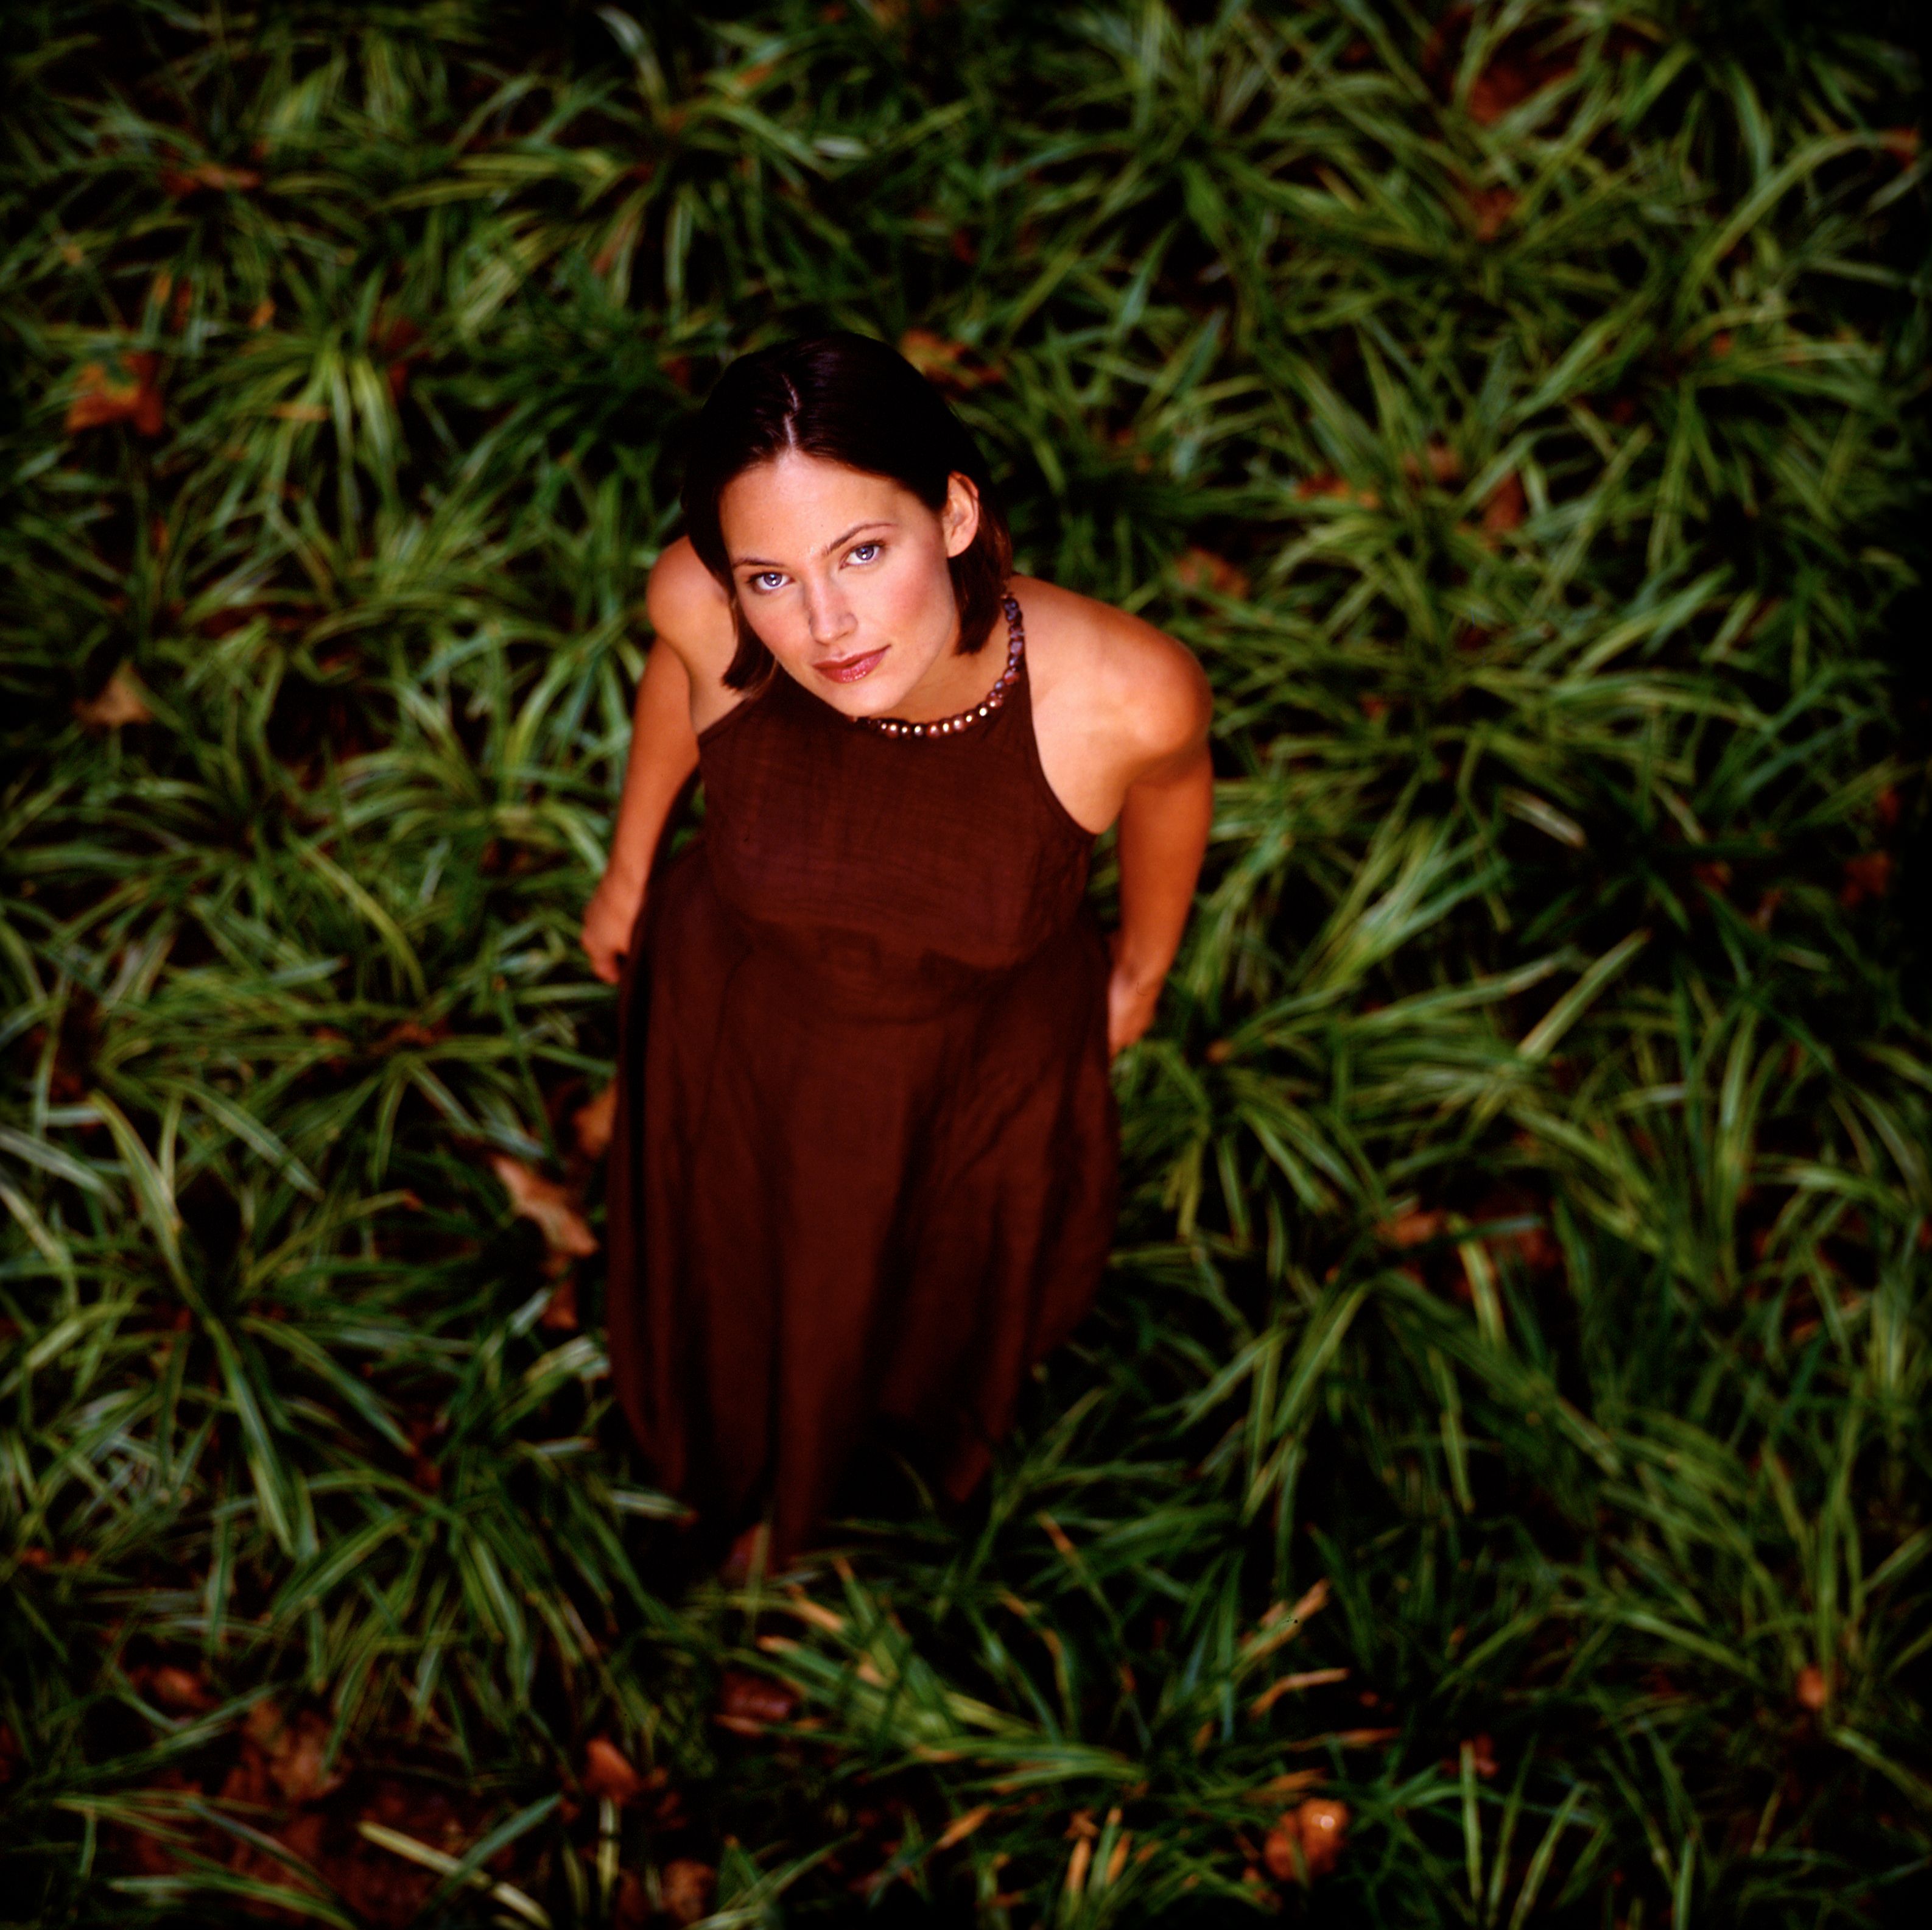 Dark haired model in brown dress stands in grasses along FDR highway in New York City, New York